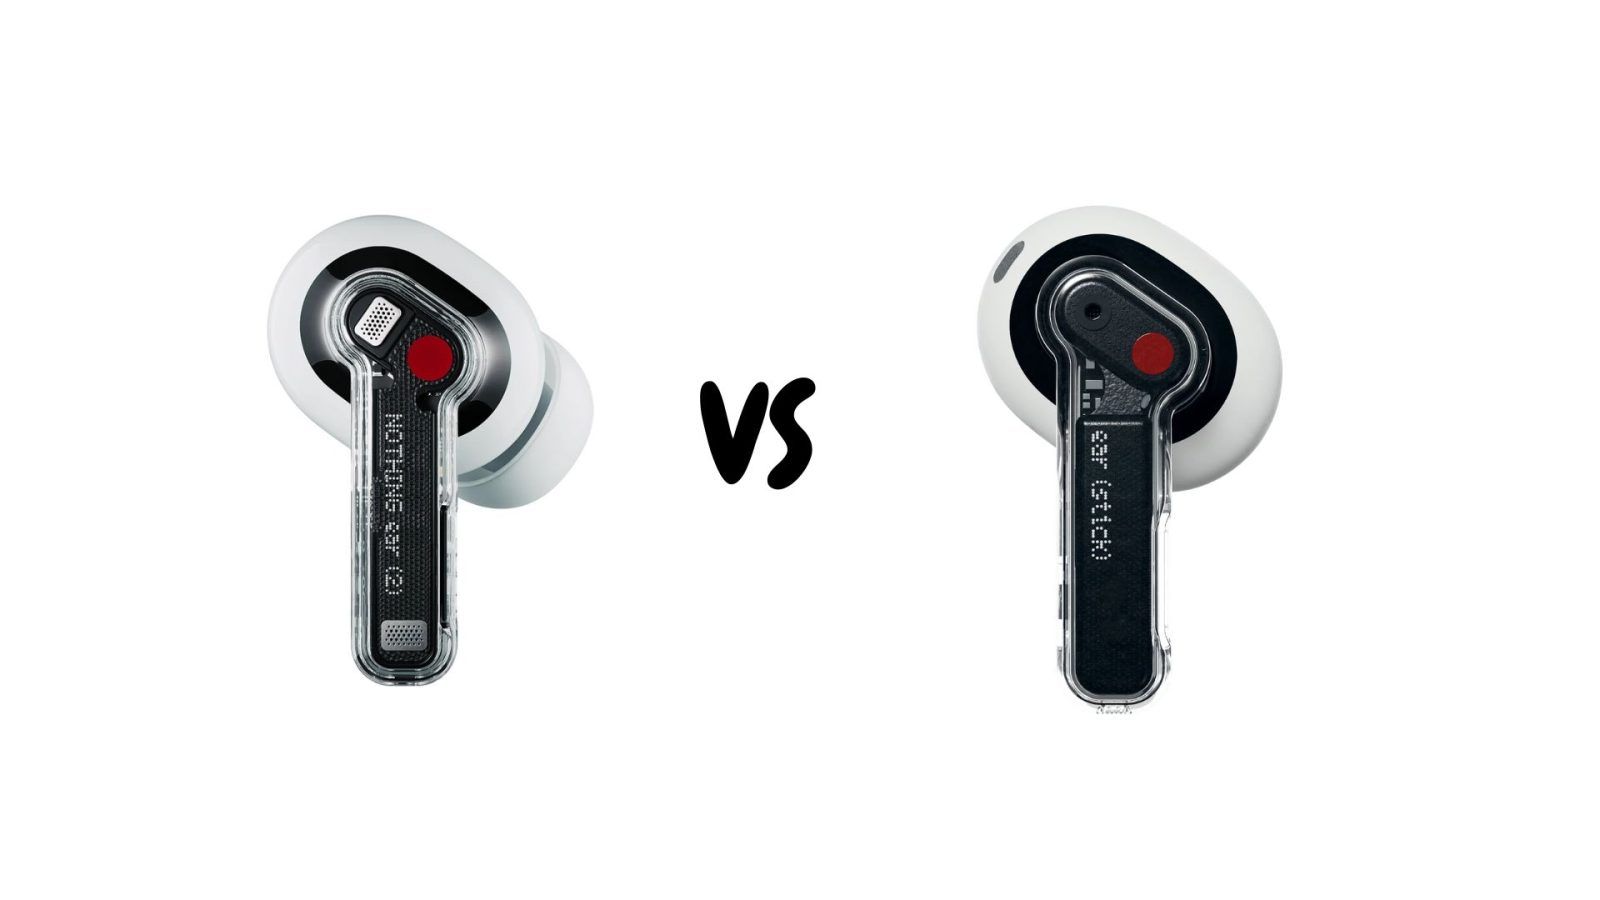 Nothing Ear (2) vs Nothing Ear (stick): Which one suits you better?